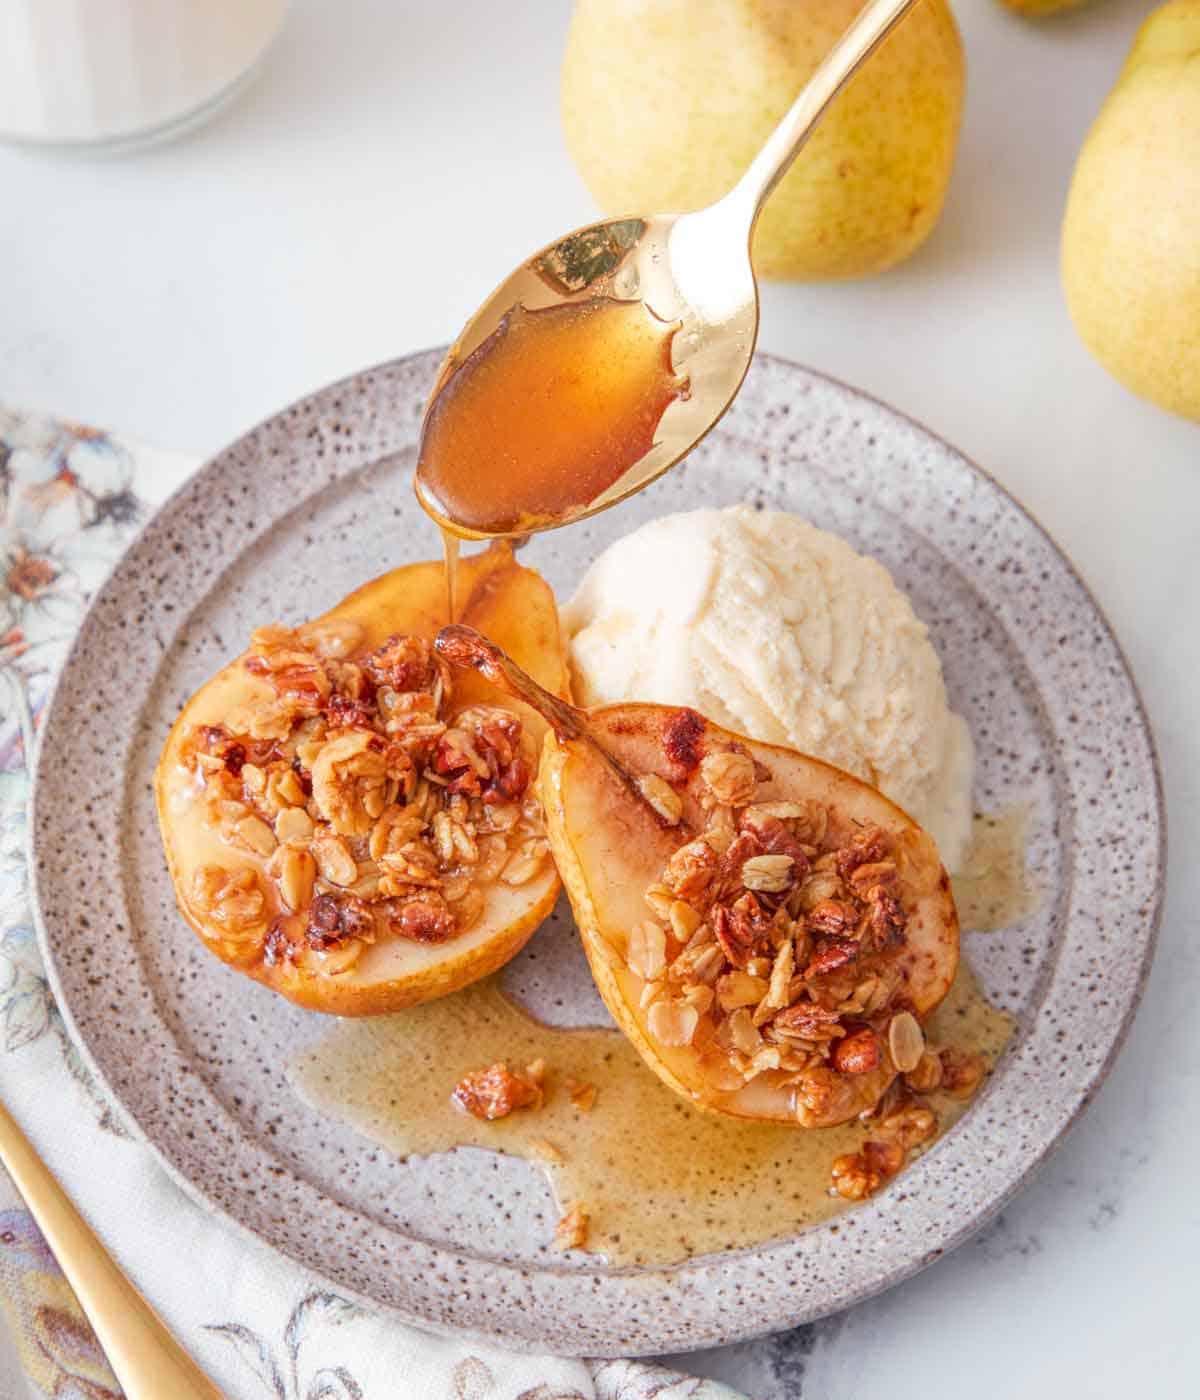 A plate with two baked pears with a scoop of ice cream with caramel drizzled on top.